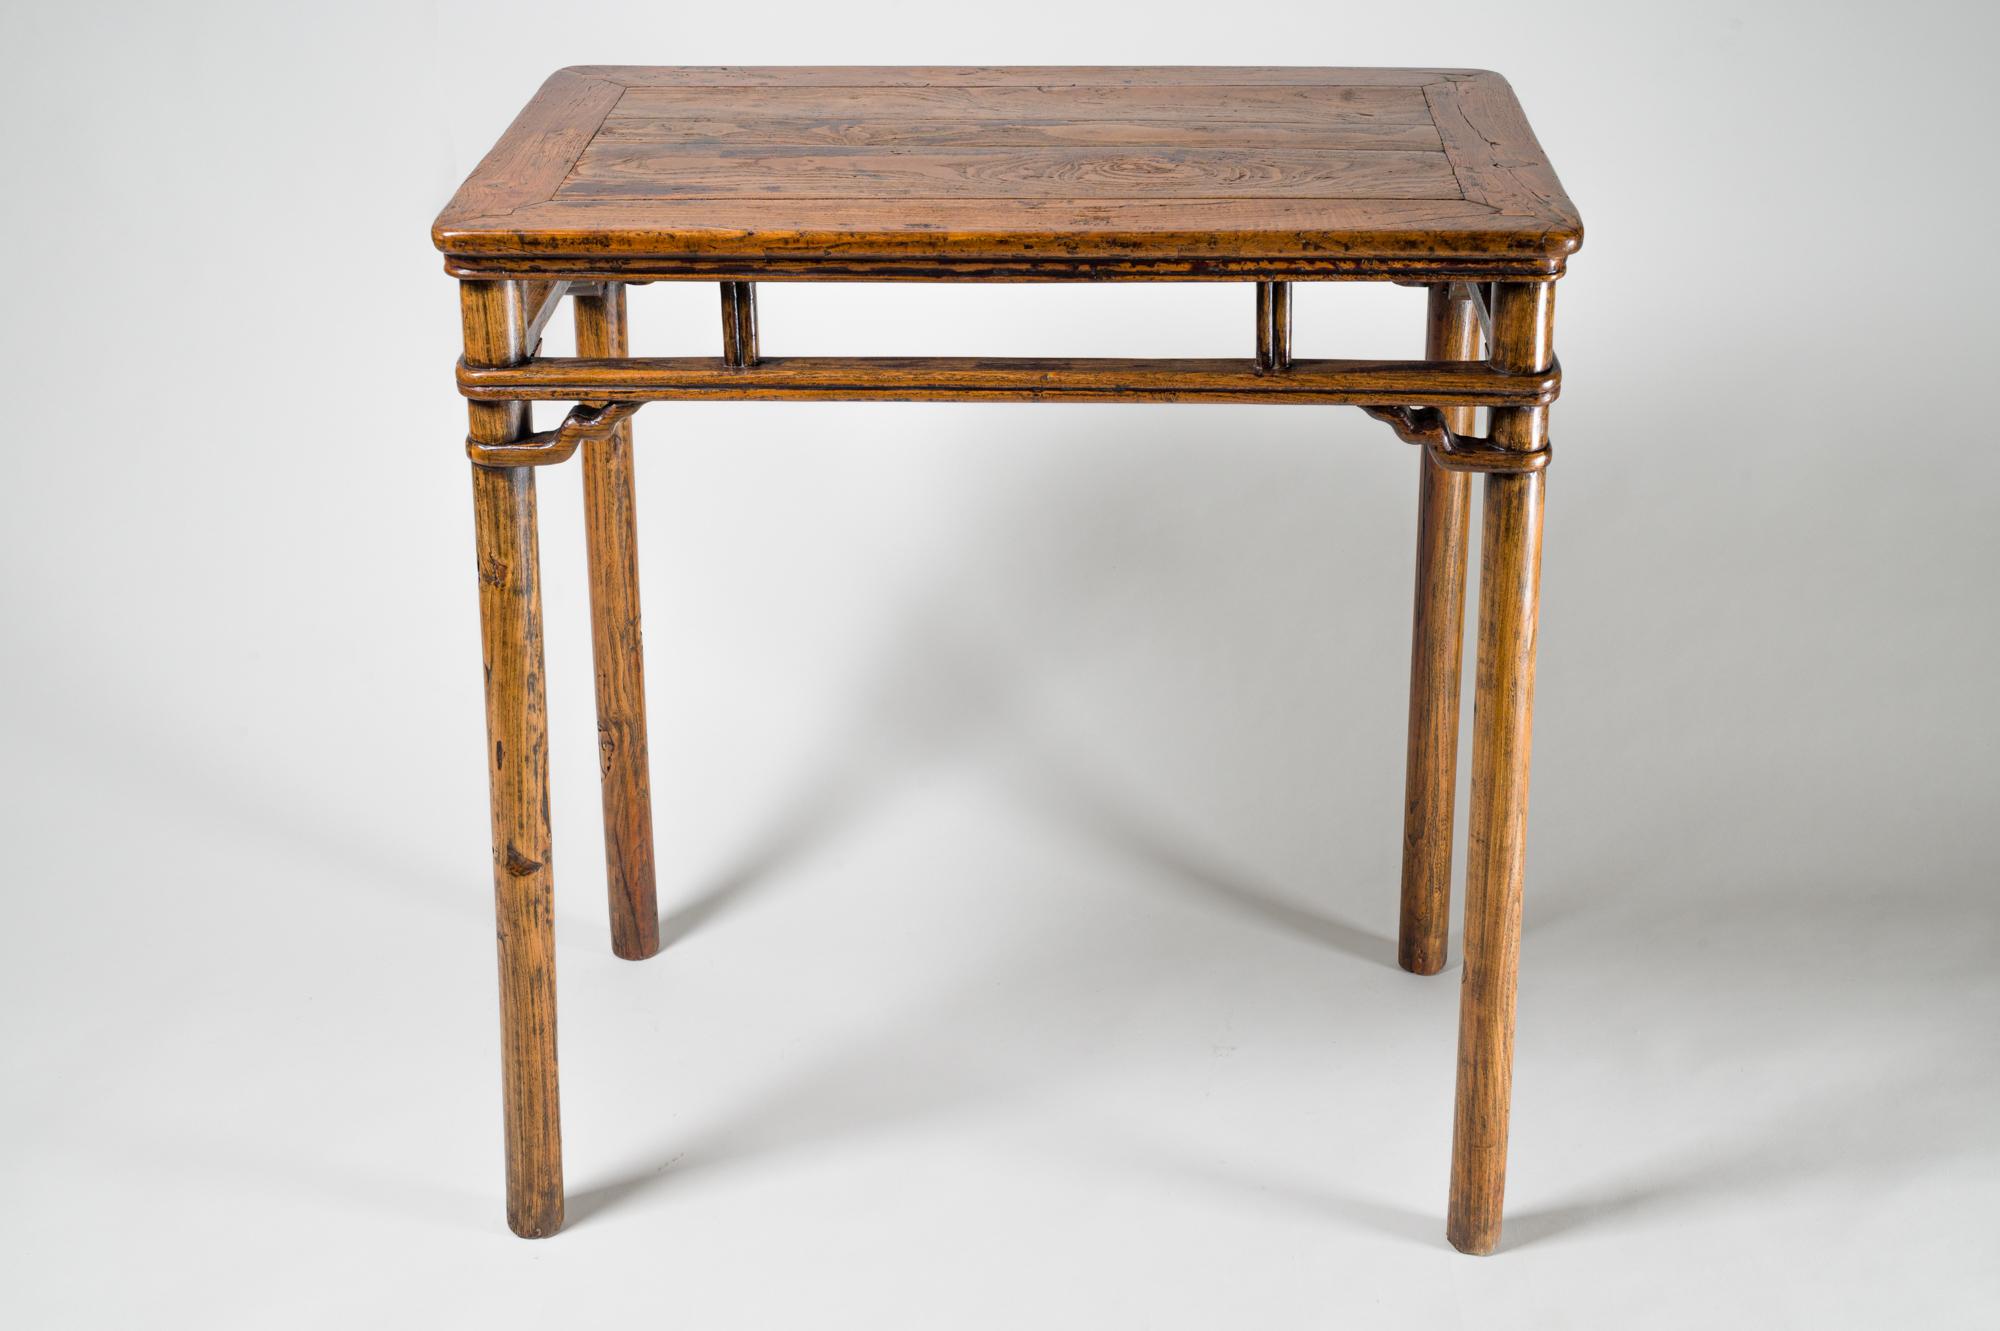 Originally used for writing, as made evident by the ink stains on top. Serpentine stretchers in each corner in the style of a 17th century table.